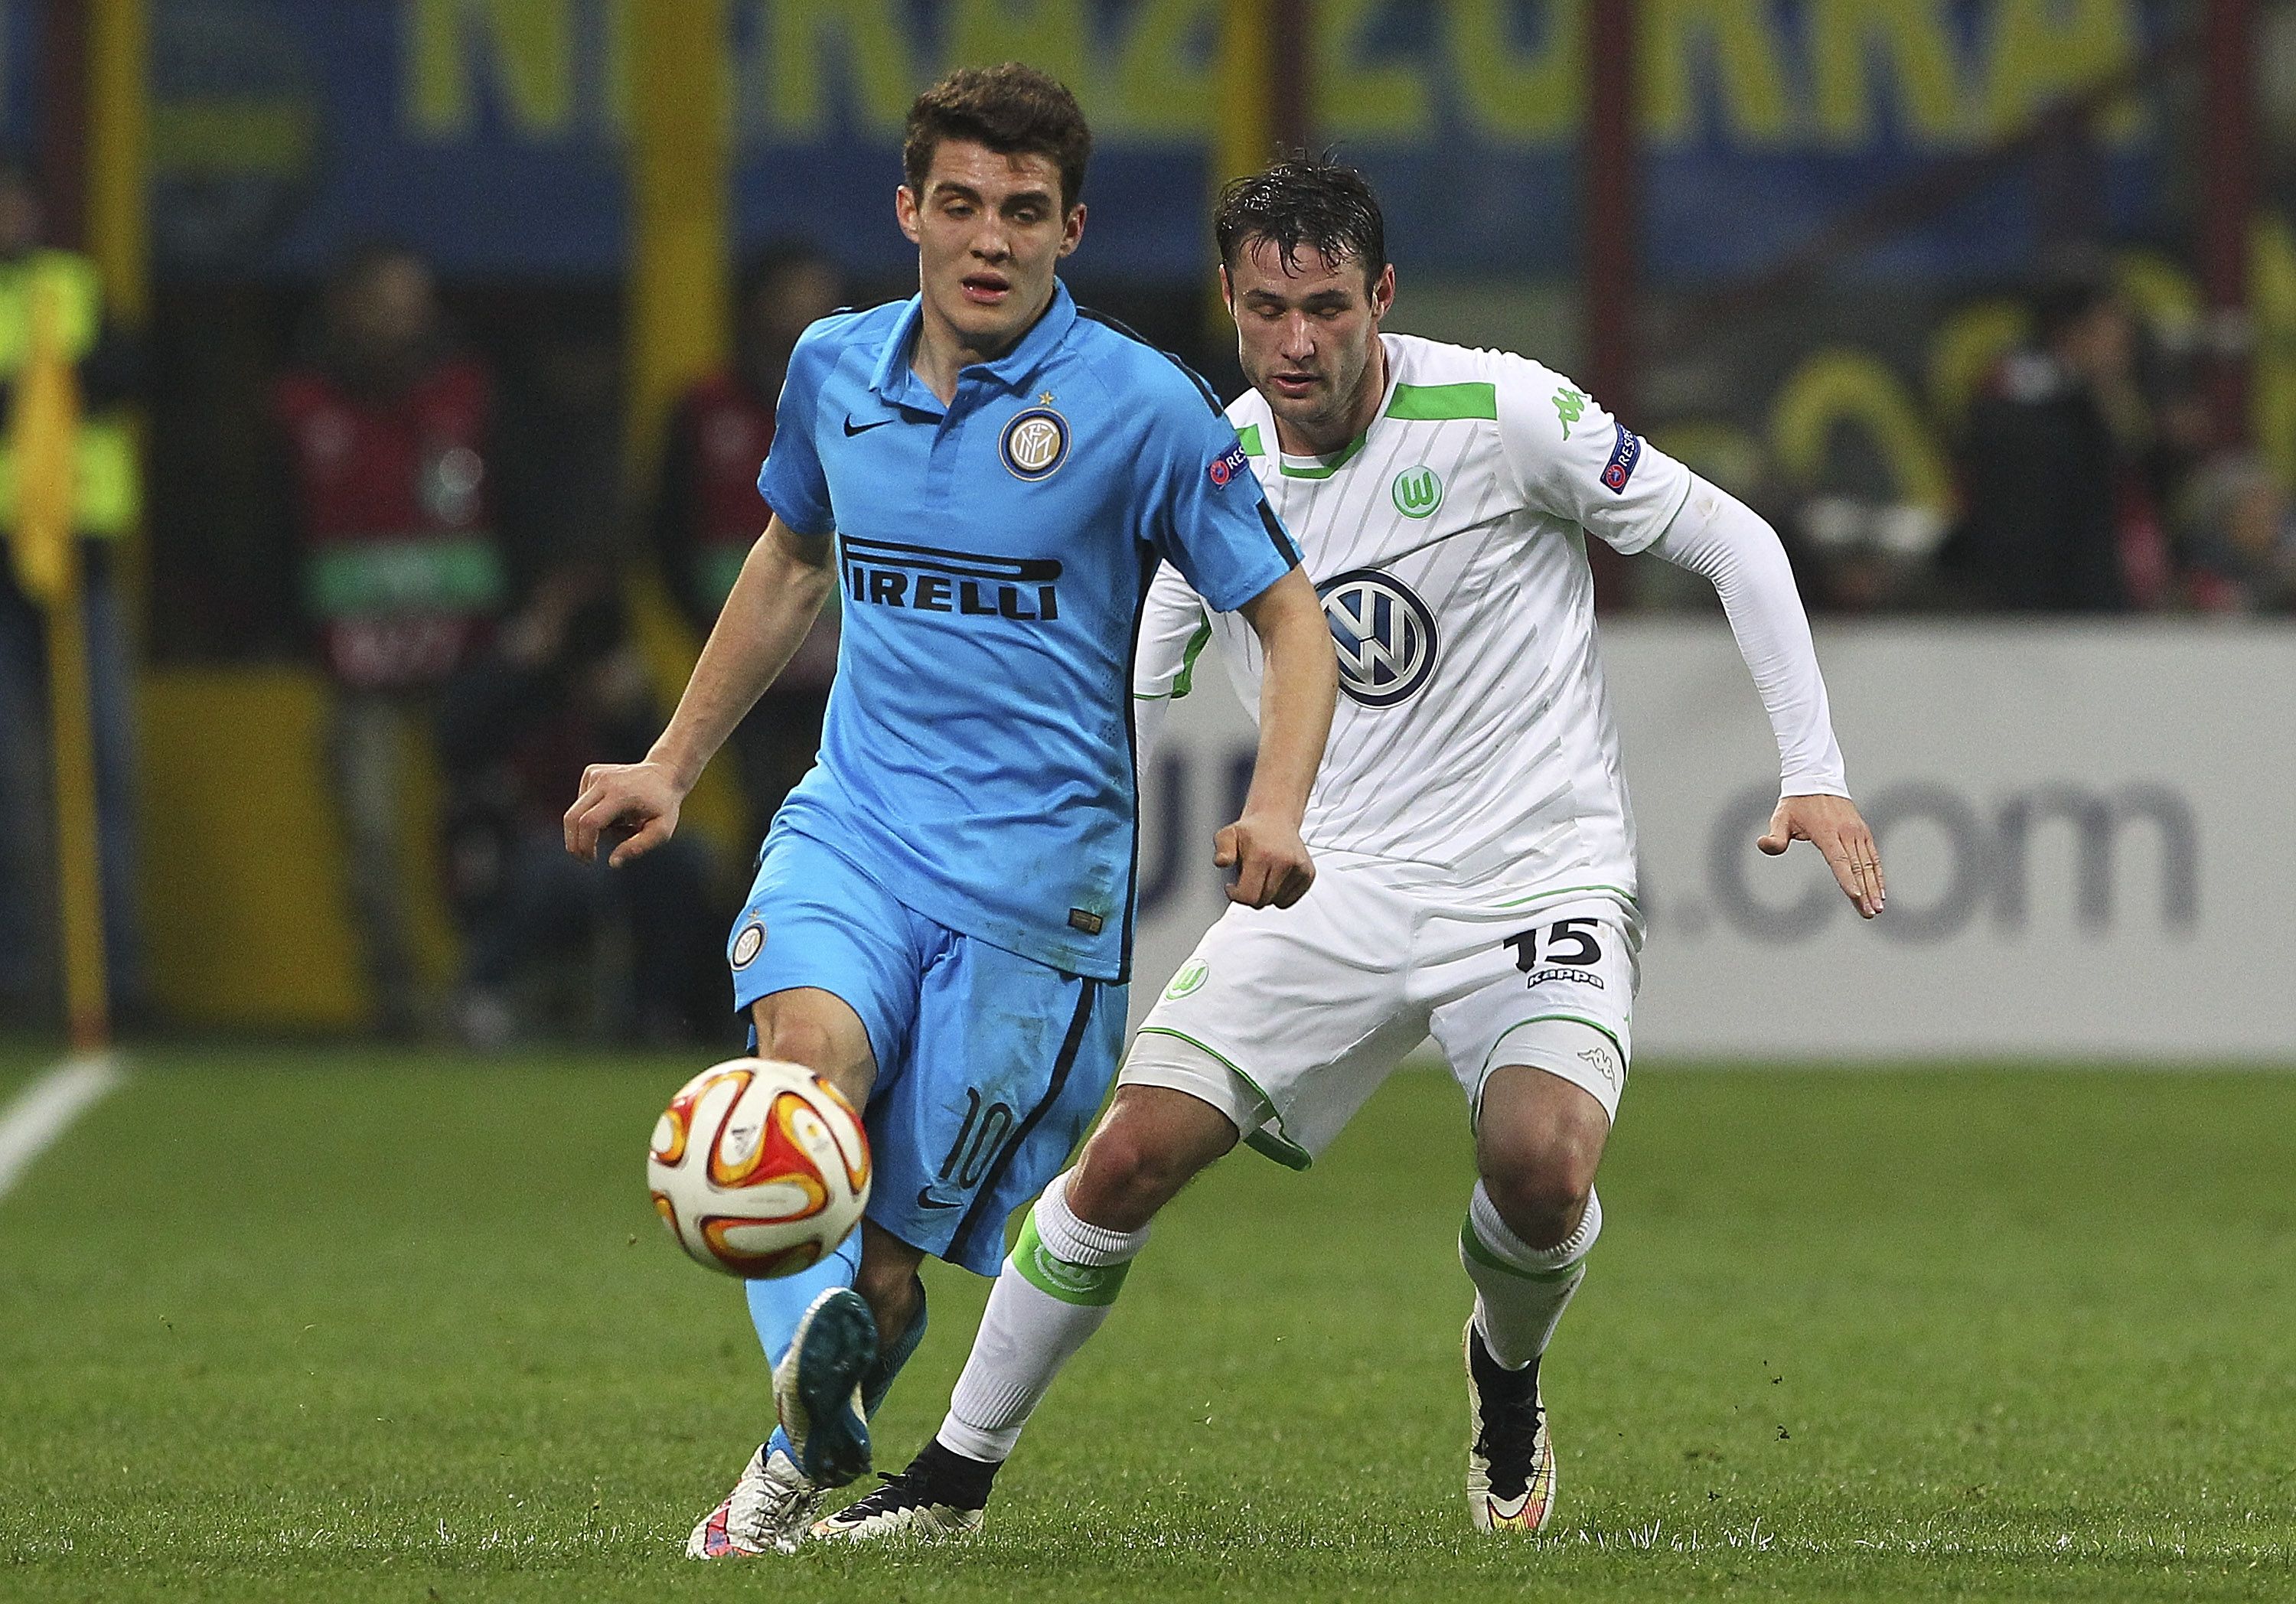 Could Mateo Kovacic Be The Heir To Luka Modric's Crown?